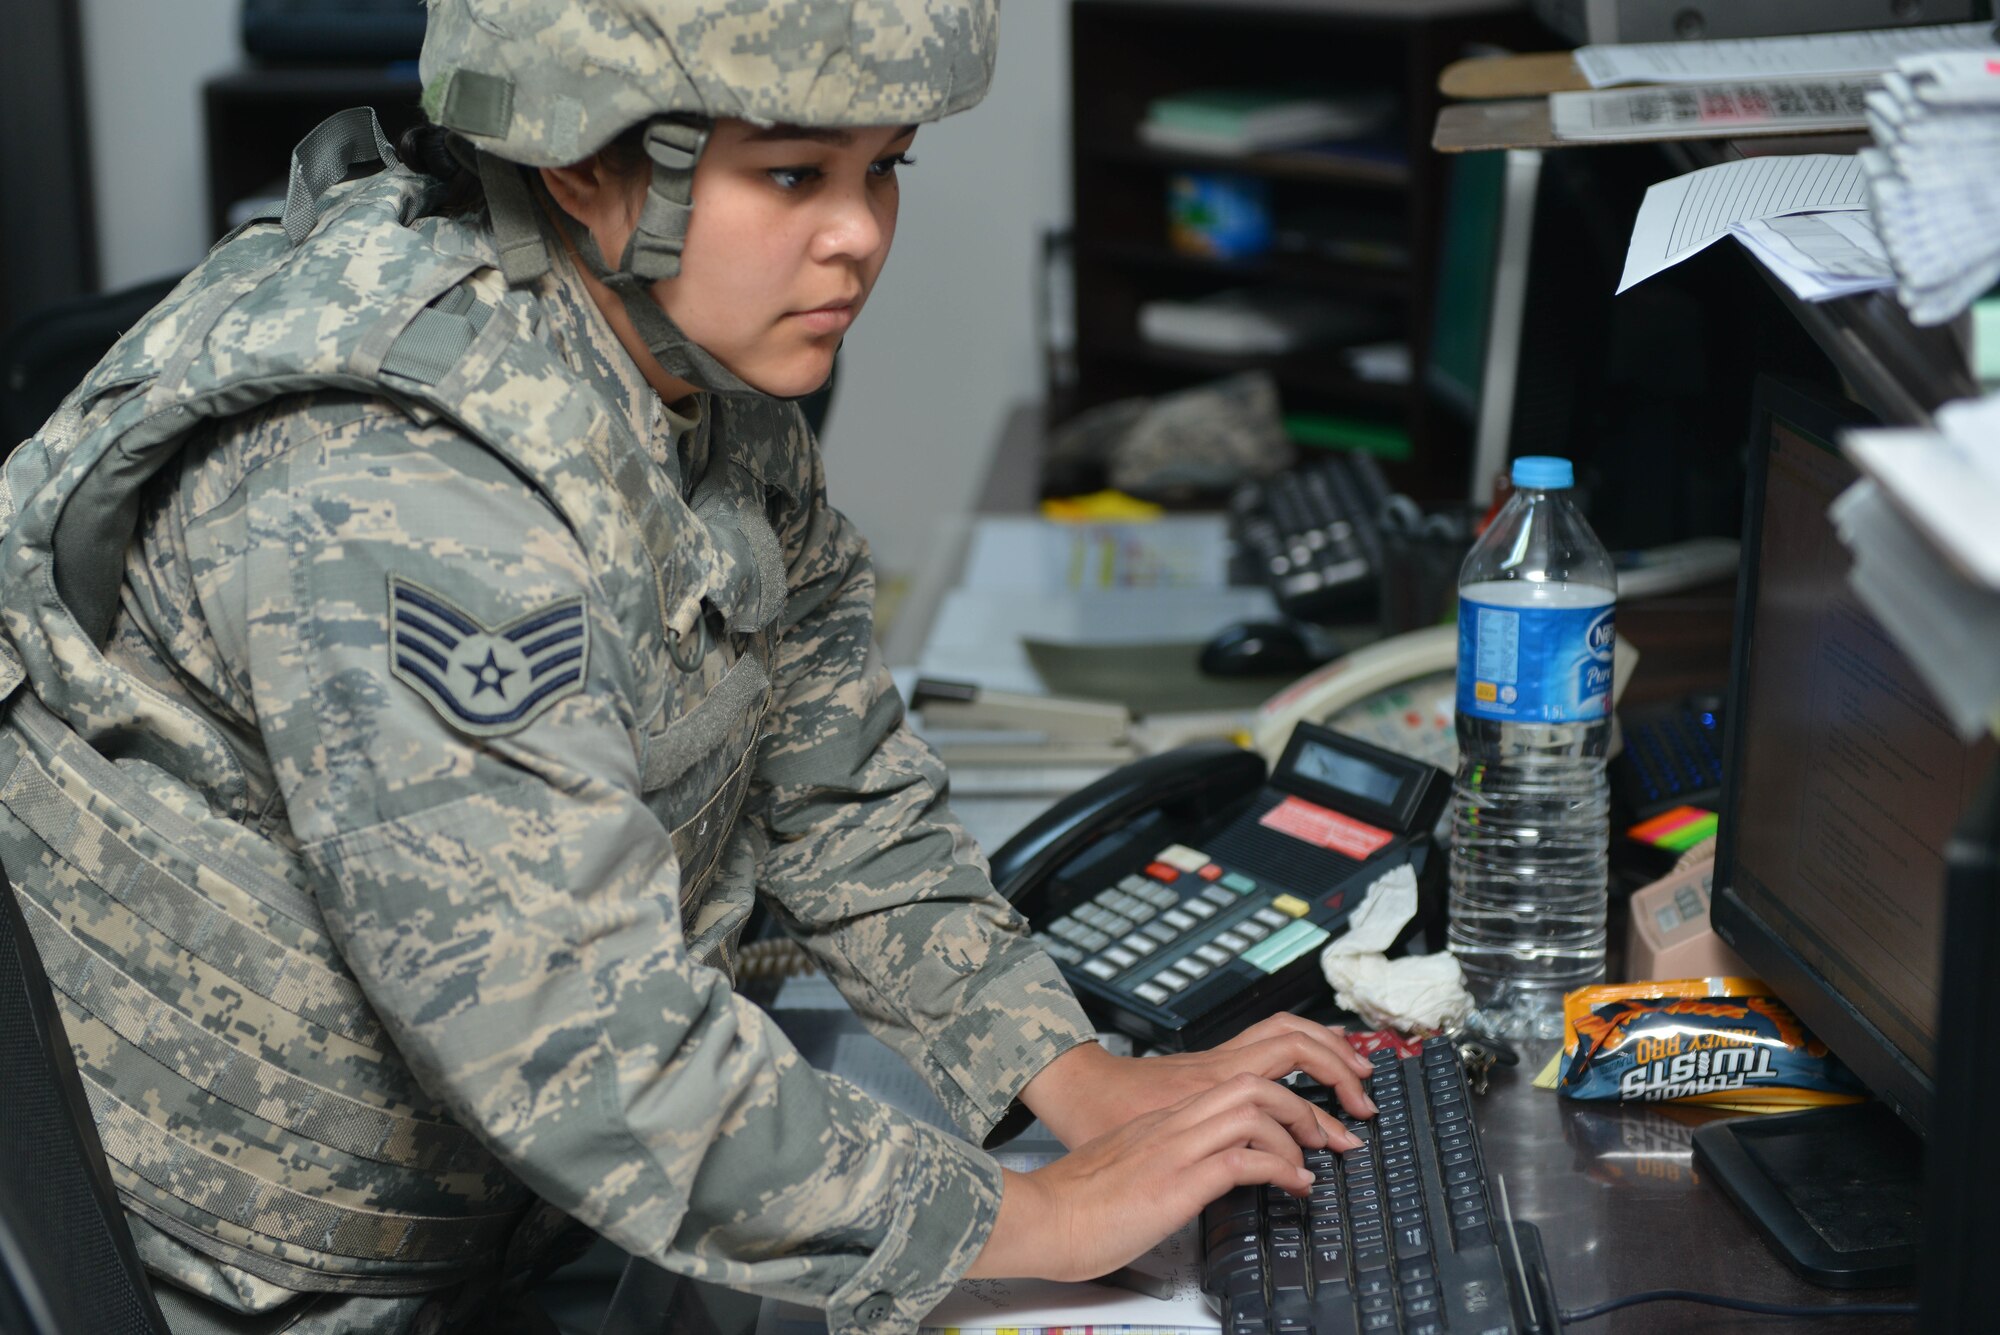 U.S. Air Force Staff Sgt. Trisha Dodds, 39th Operations Support Squadron airfield management operations supervisor, annotates information into an events log during an airfield indirect fire exercise, May 27, 2017, at Incirlik Air Base, Turkey. An events log contains general information pertaining to an event or situation. (U.S. Air Force photo by Senior Airman John Nieves Camacho)